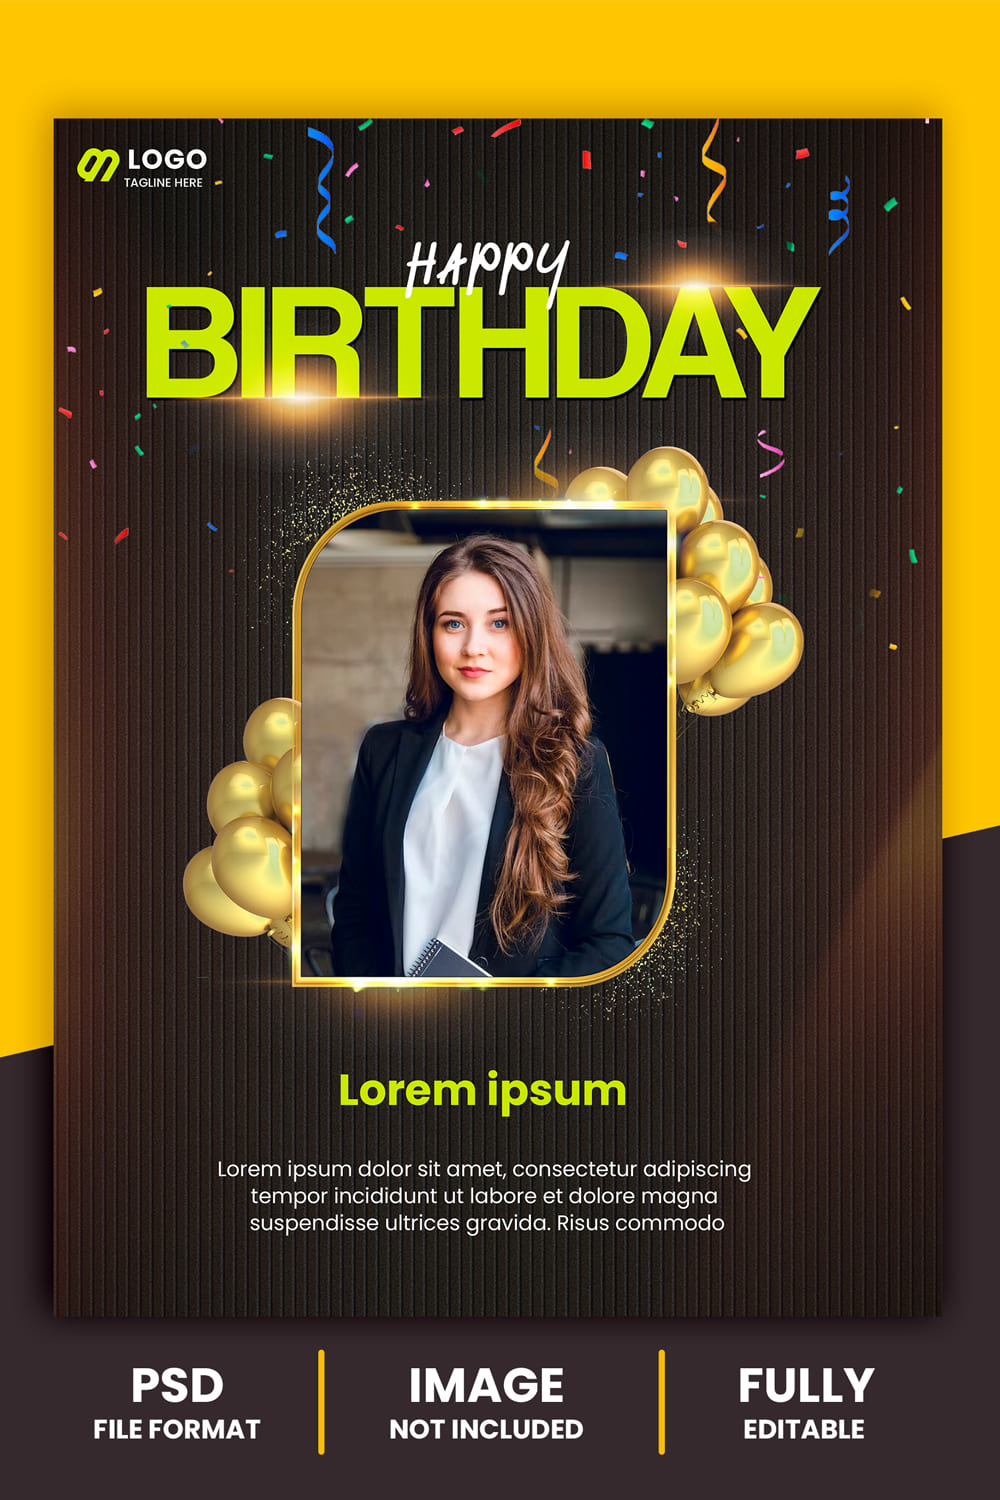 PSD Happy birthday celebration corporate social media instagram poster high quality IN PHOTOSHOP pinterest preview image.